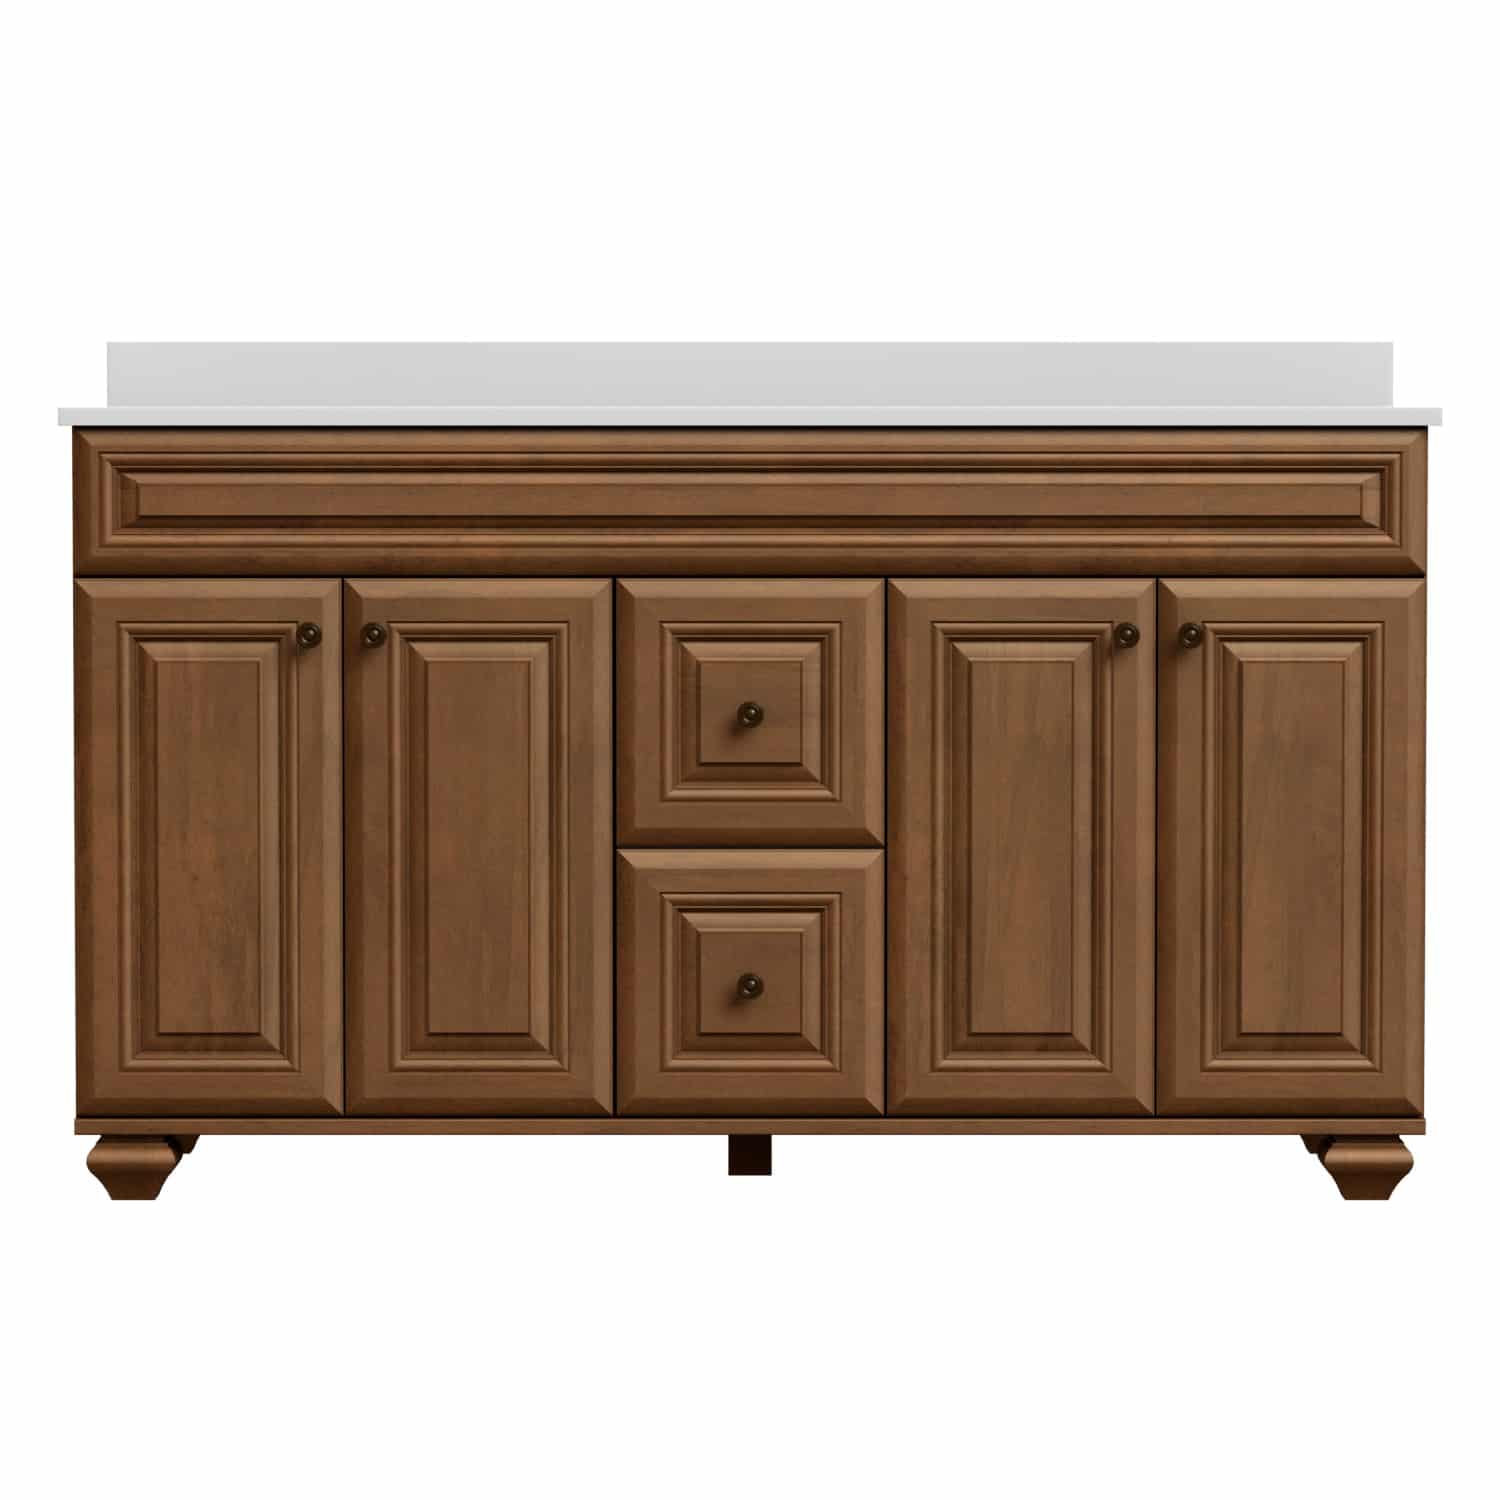 60"W Manchester Double Bowl Vanity Base in Mocha